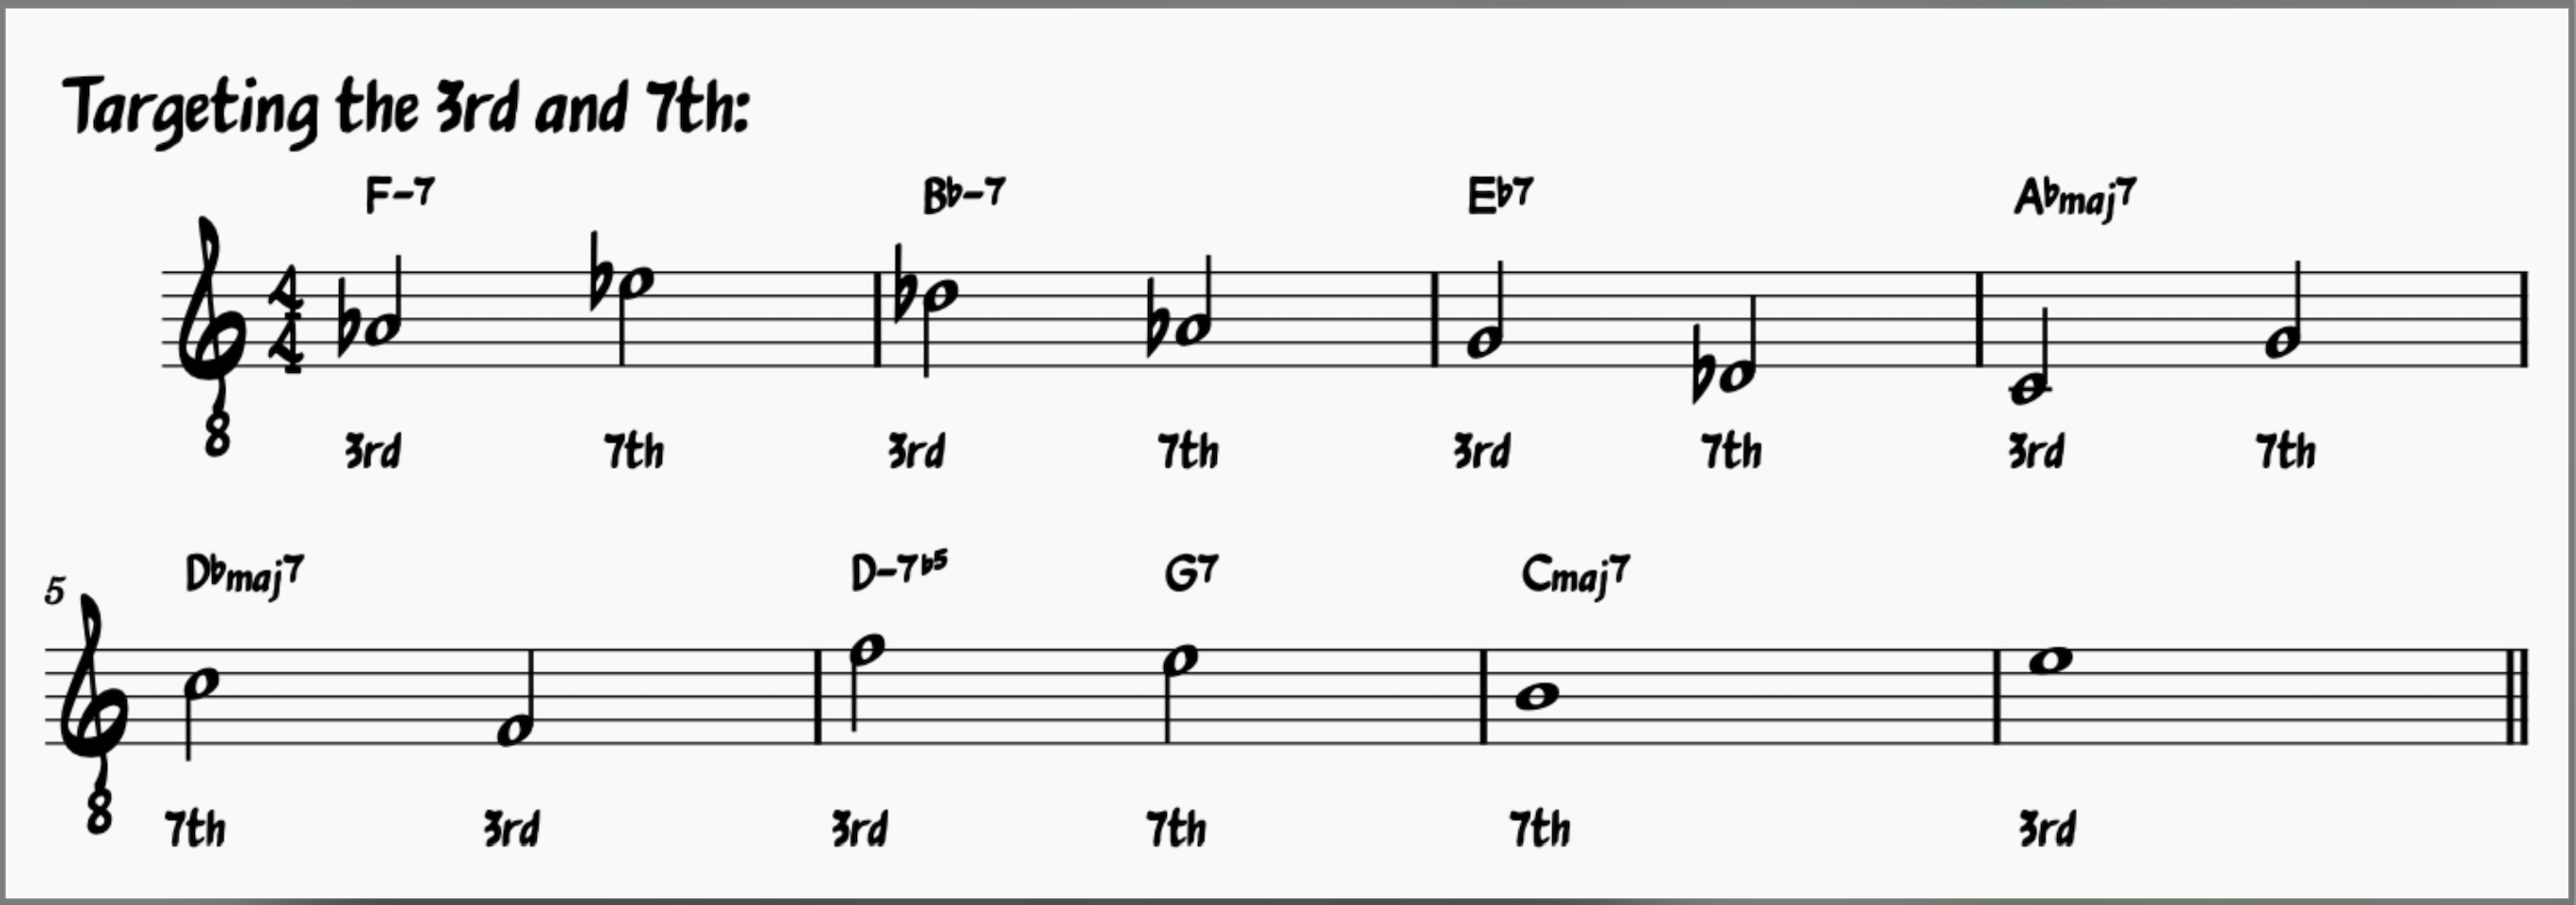 Chord Tone Exercise for All The Things You Are Targeting the 7th and 3rd